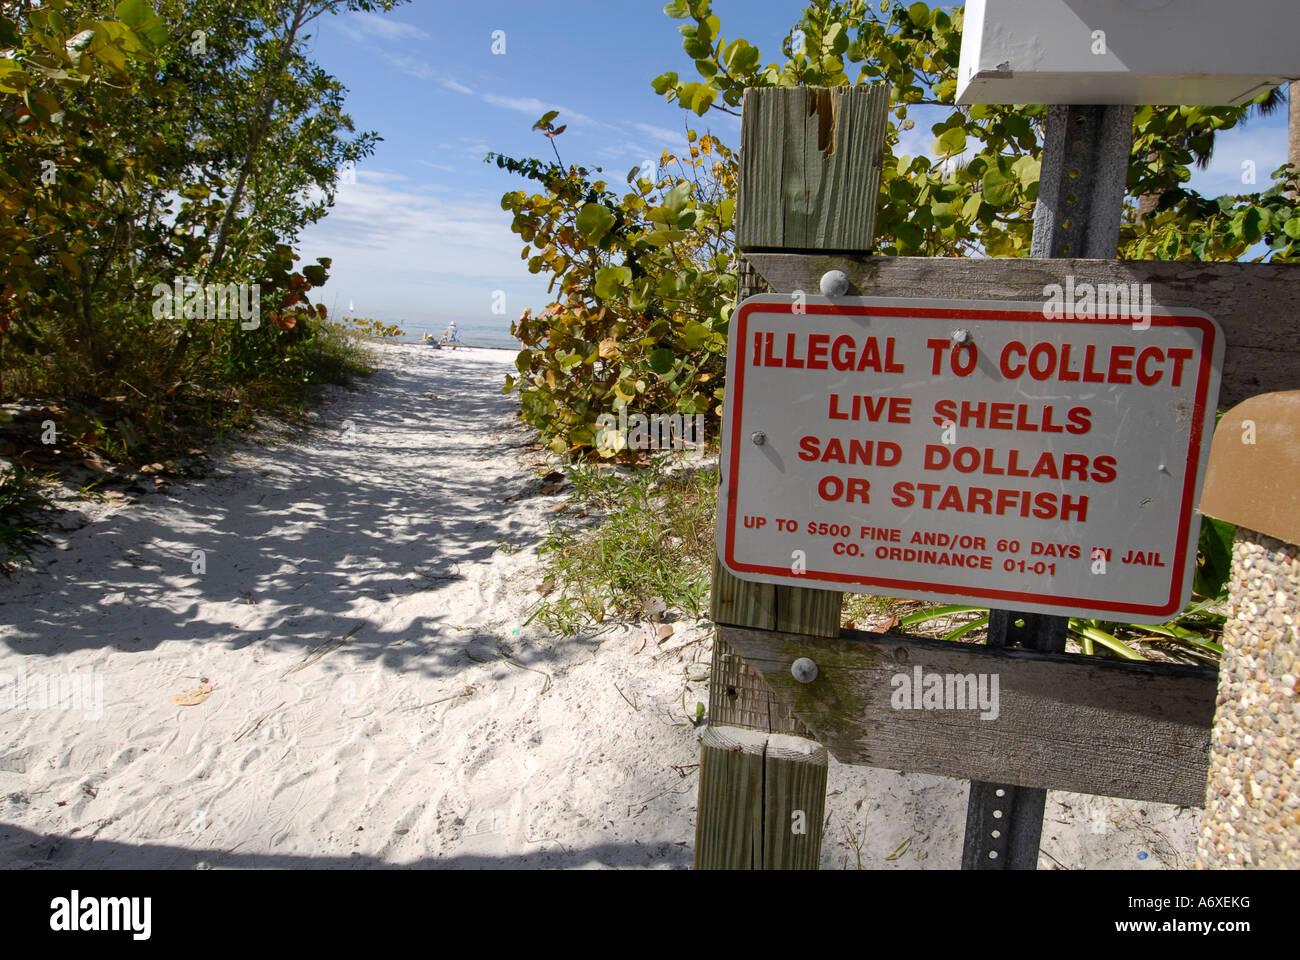 Sign warning not to collect live shells at Fort Meyers Beach Florida FL Stock Photo